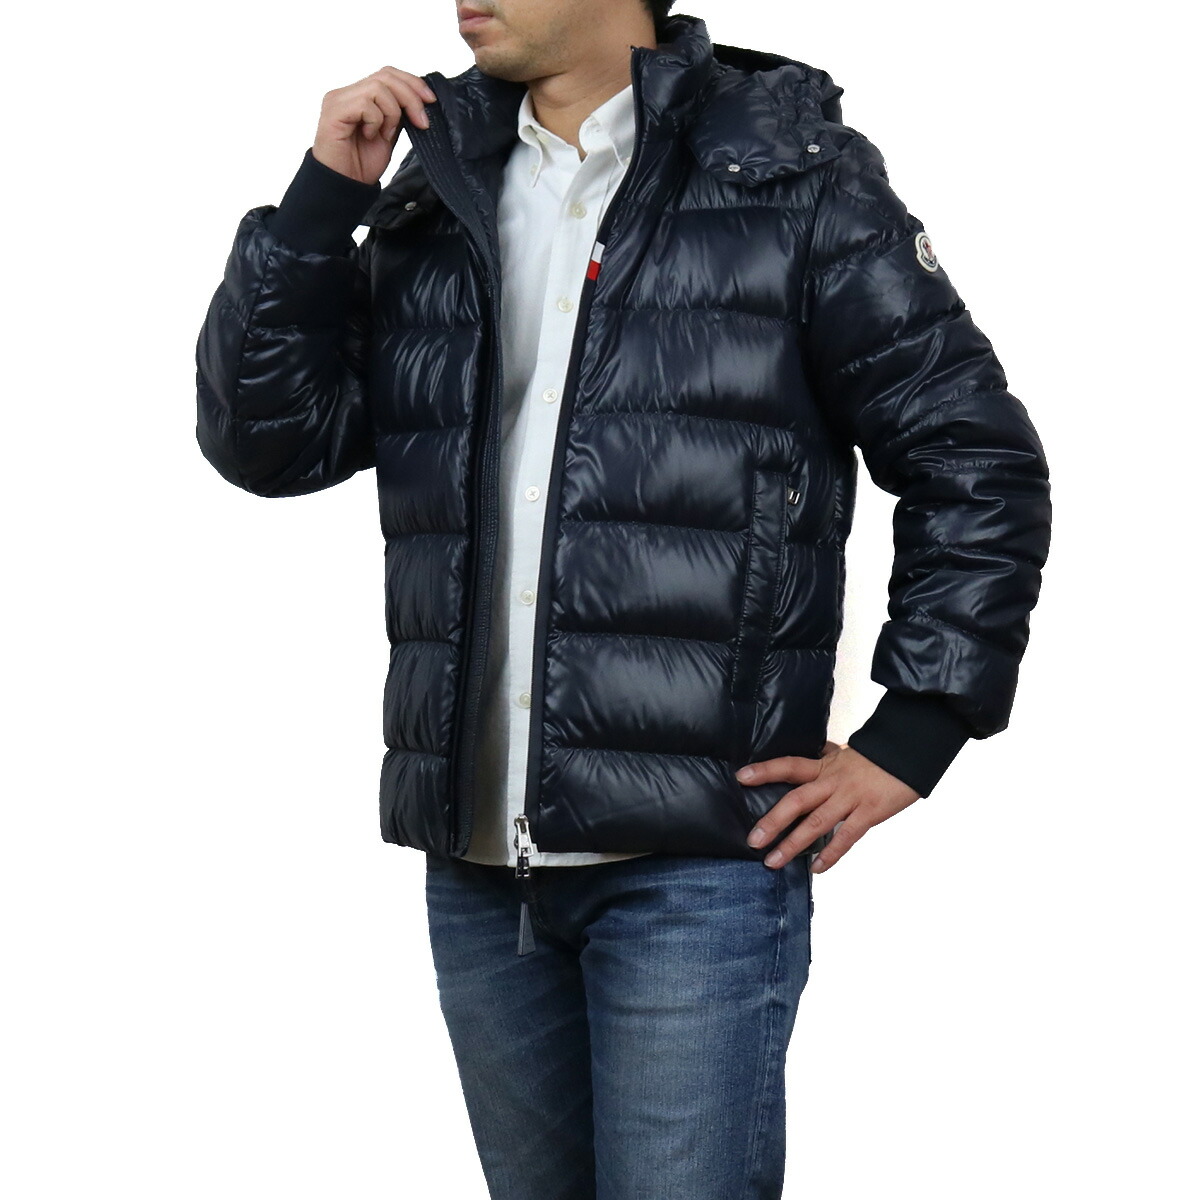 Armerie Boutique モンクレール MONCLER メンズ－ジャケット，上着 1A00002 CUVELLIER GIUBB  68950 742 ネイビー系 outer-01